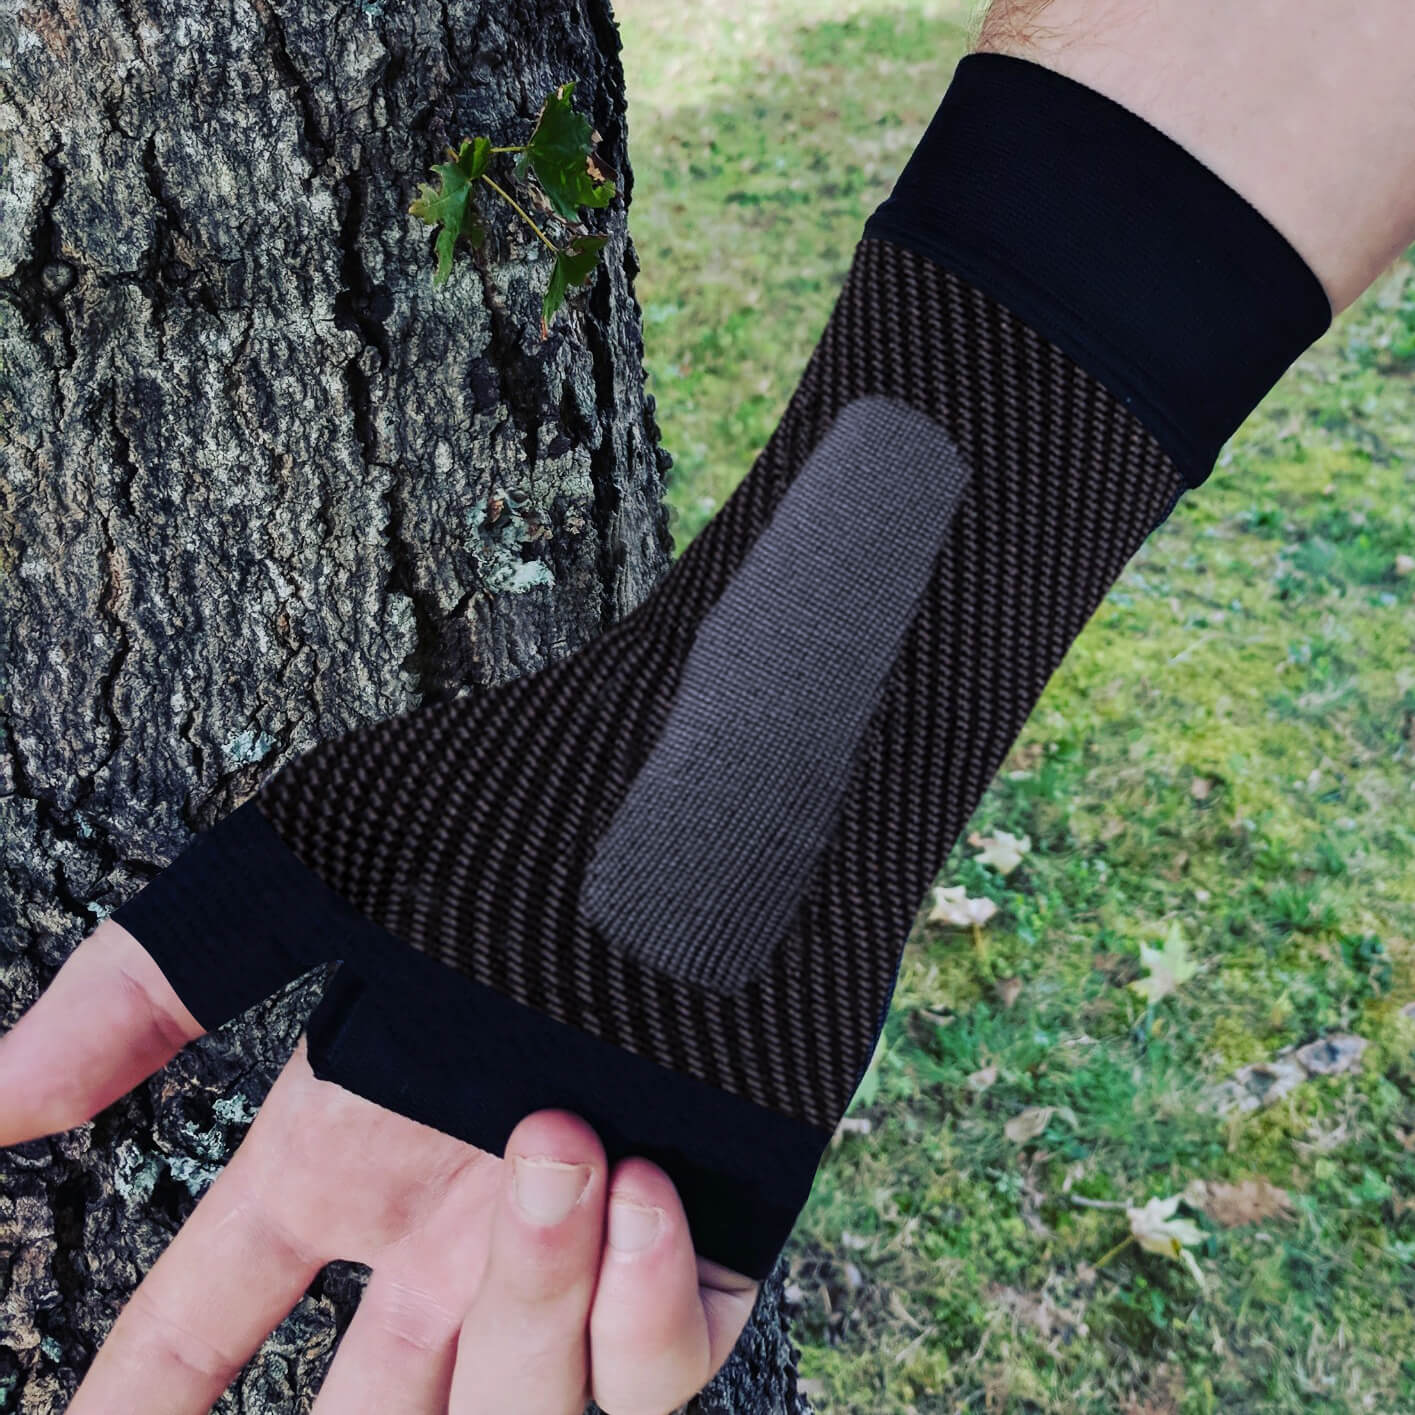 Wrist Sleeve WS6: Optimal Relief For Carpal Tunnel